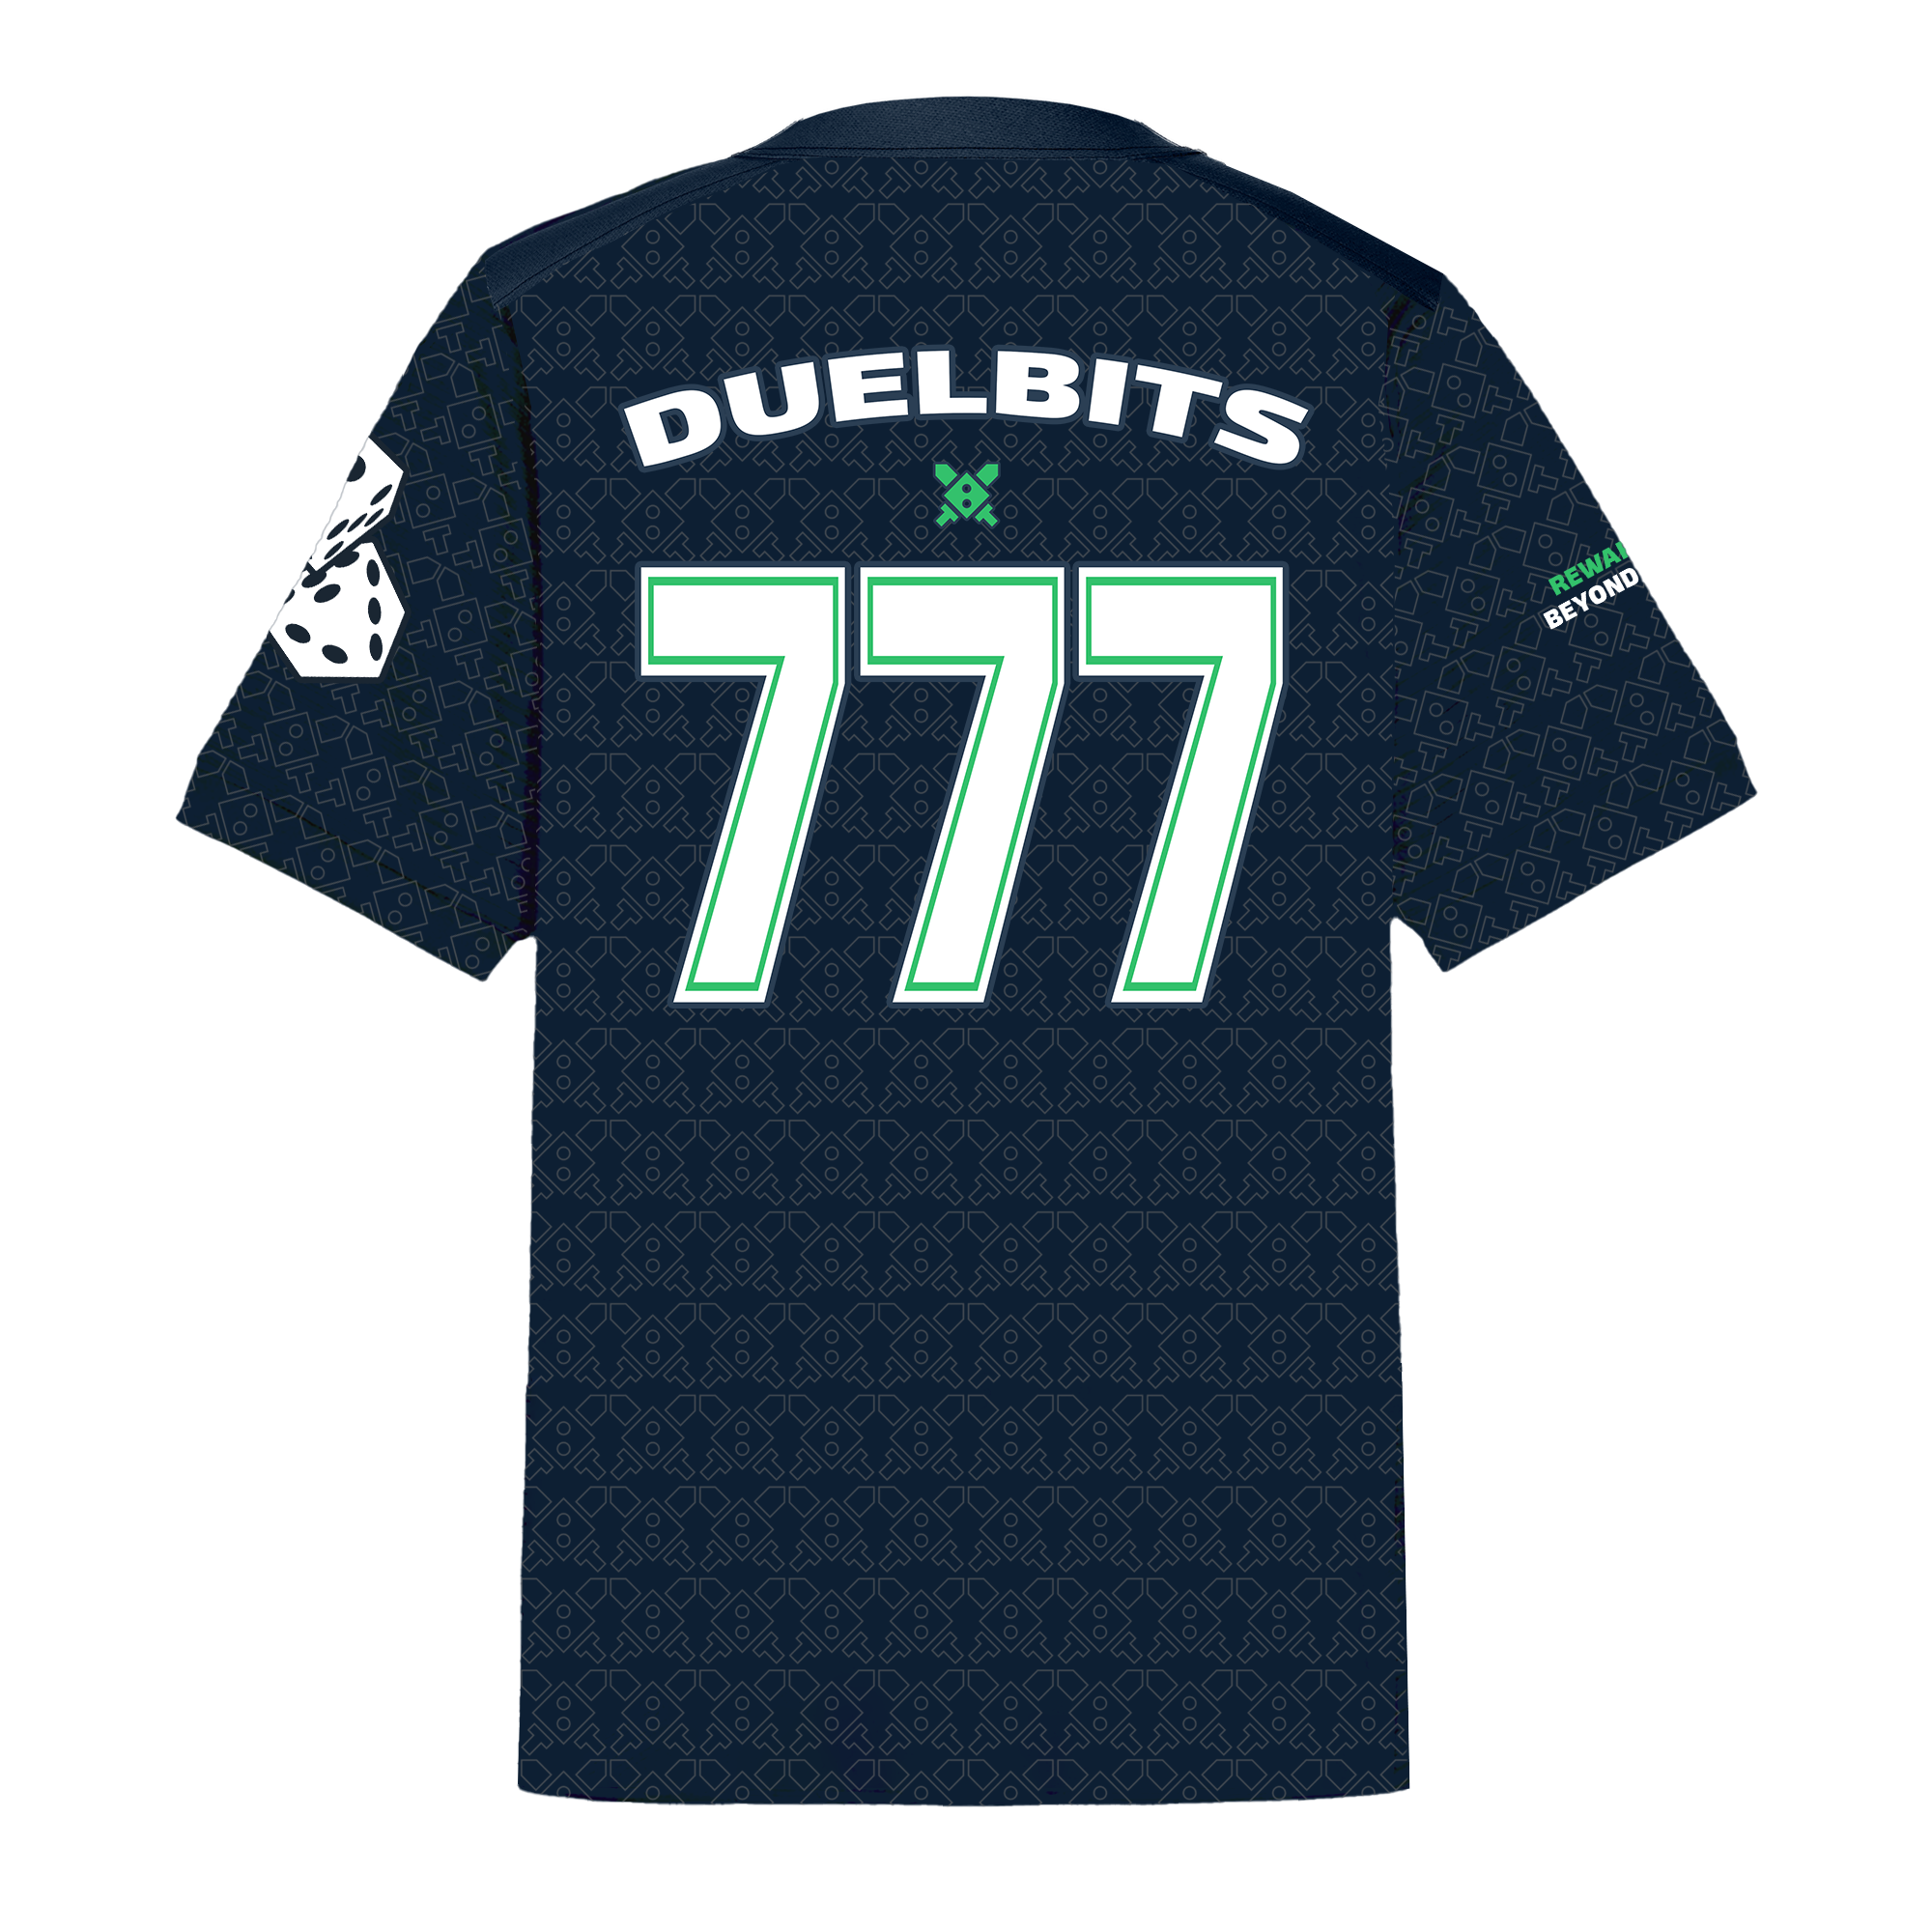 Duelbits Jersey